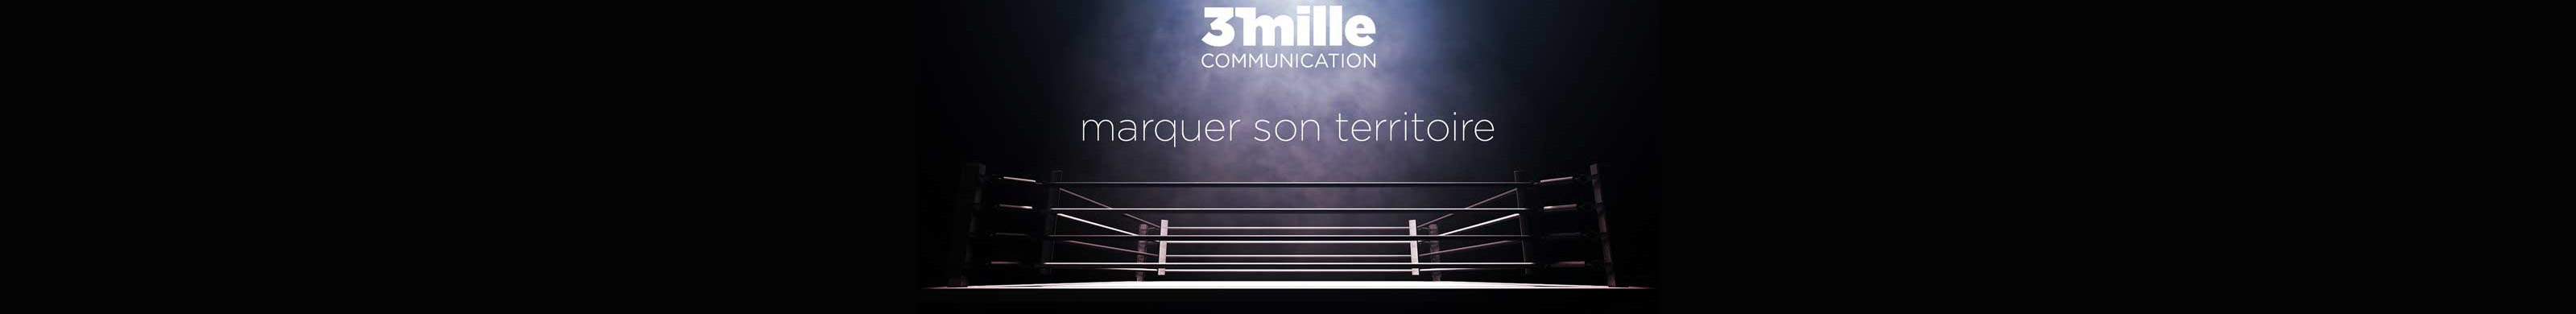 31mille communications profilbanner